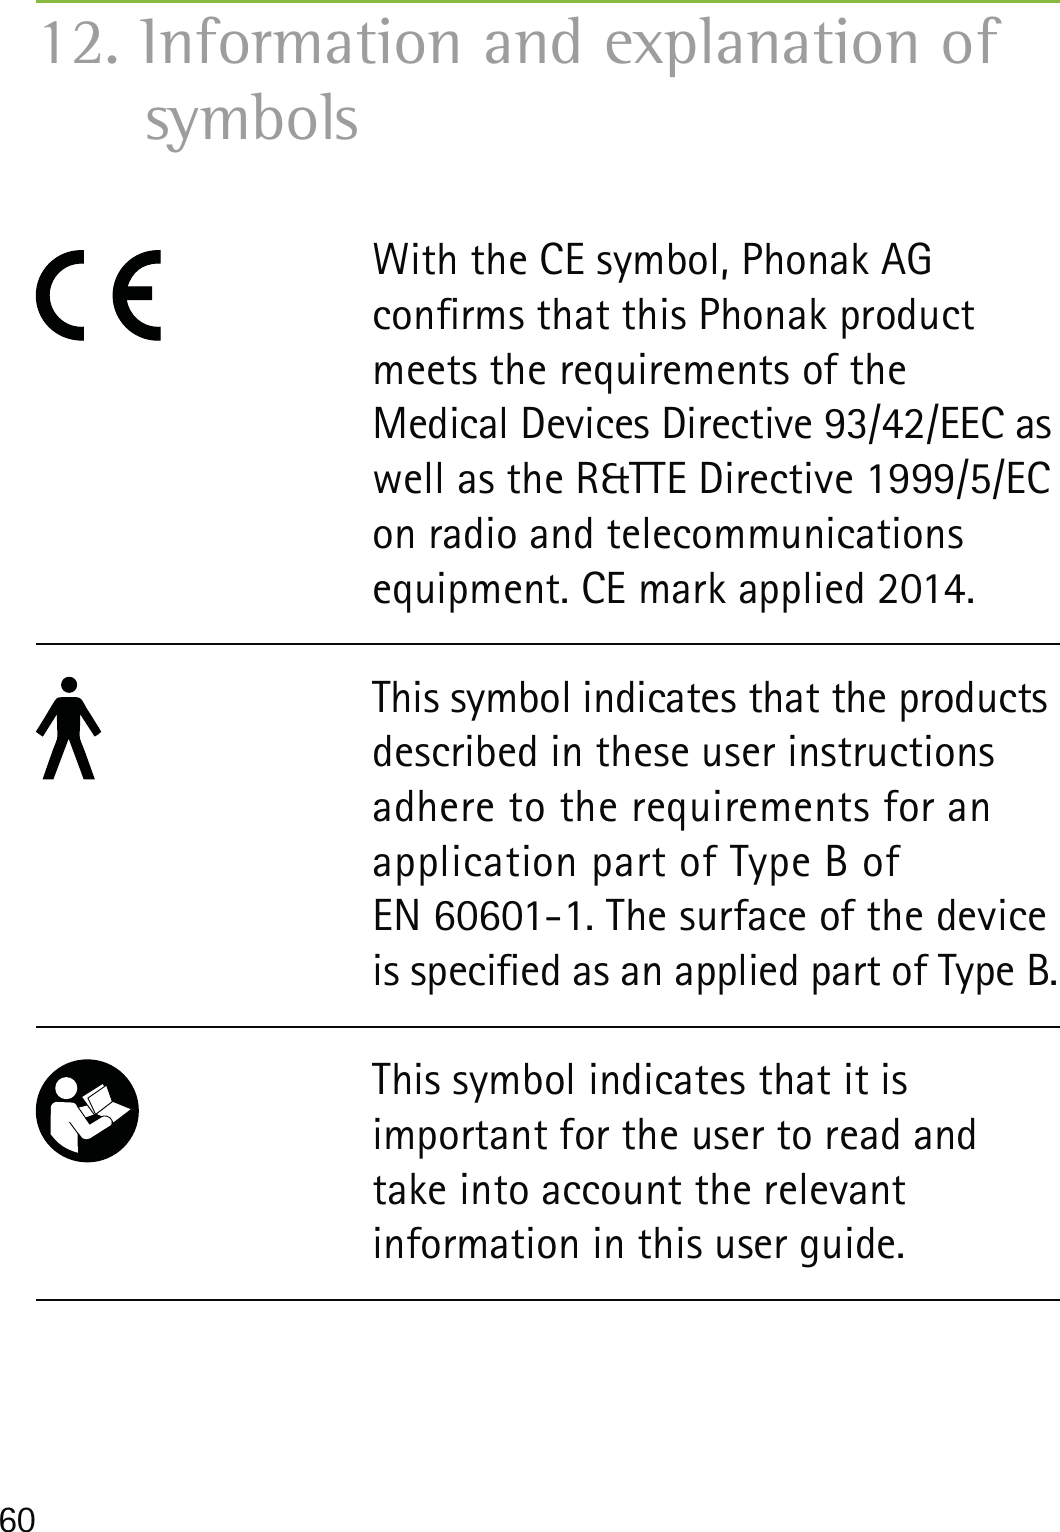 6012. Information and explanation of symbols With the CE symbol, Phonak AG  conrms that this Phonak product meets the requirements of the  Medical Devices Directive 93/42/EEC as well as the R&amp;TTE Directive 1999/5/EC on radio and telecommunications equipment. CE mark applied 2014. This symbol indicates that the products described in these user instructions adhere to the requirements for an application part of Type B of  EN 60601-1. The surface of the device is specied as an applied part of Type B.This symbol indicates that it is  important for the user to read and take into account the relevant  information in this user guide.